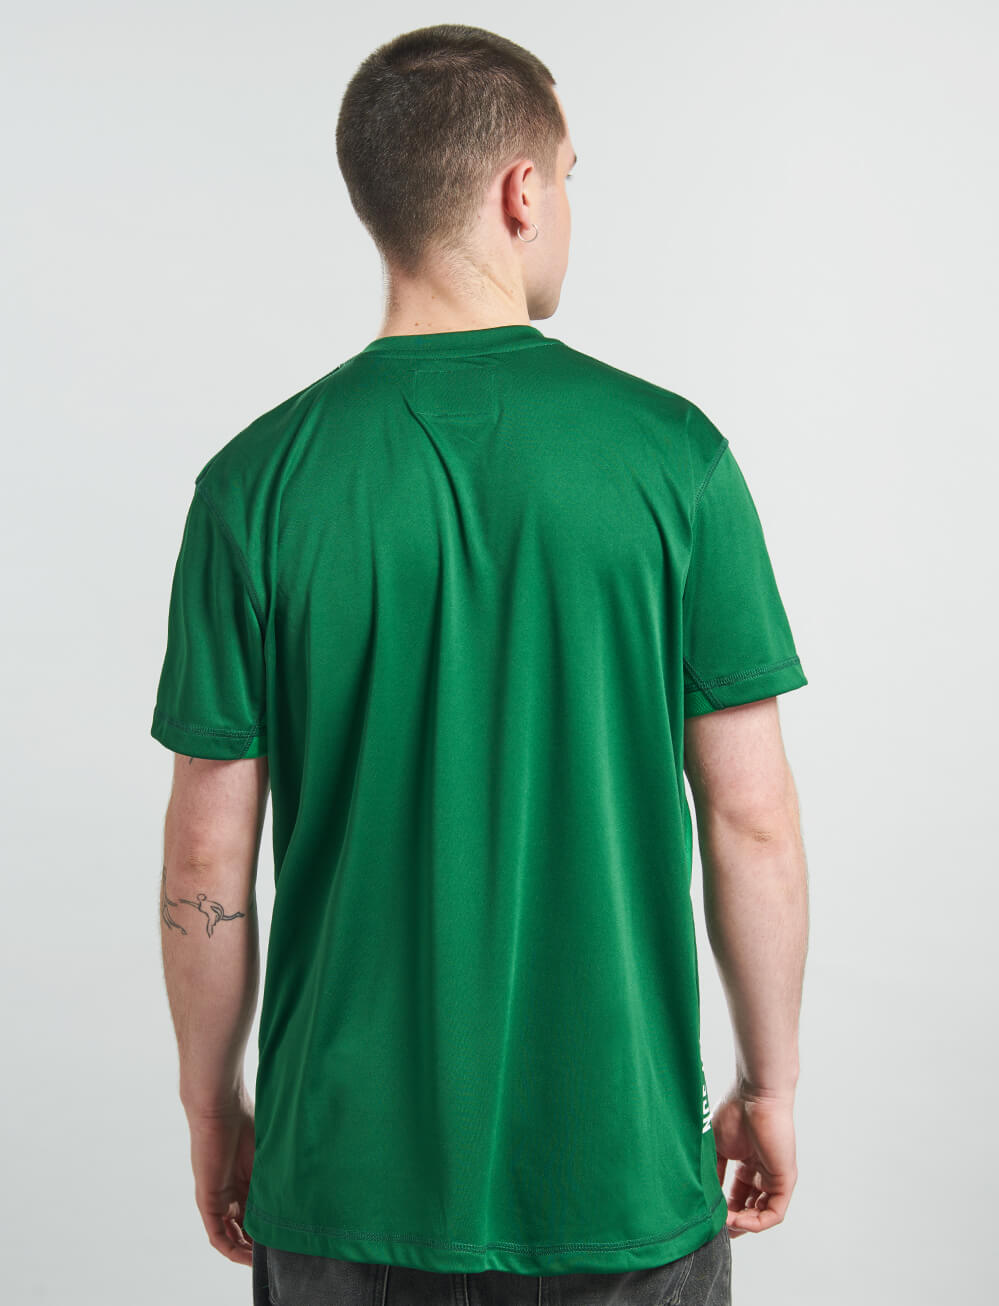 Official Celtic T-Shirt - Green - The World Football Store